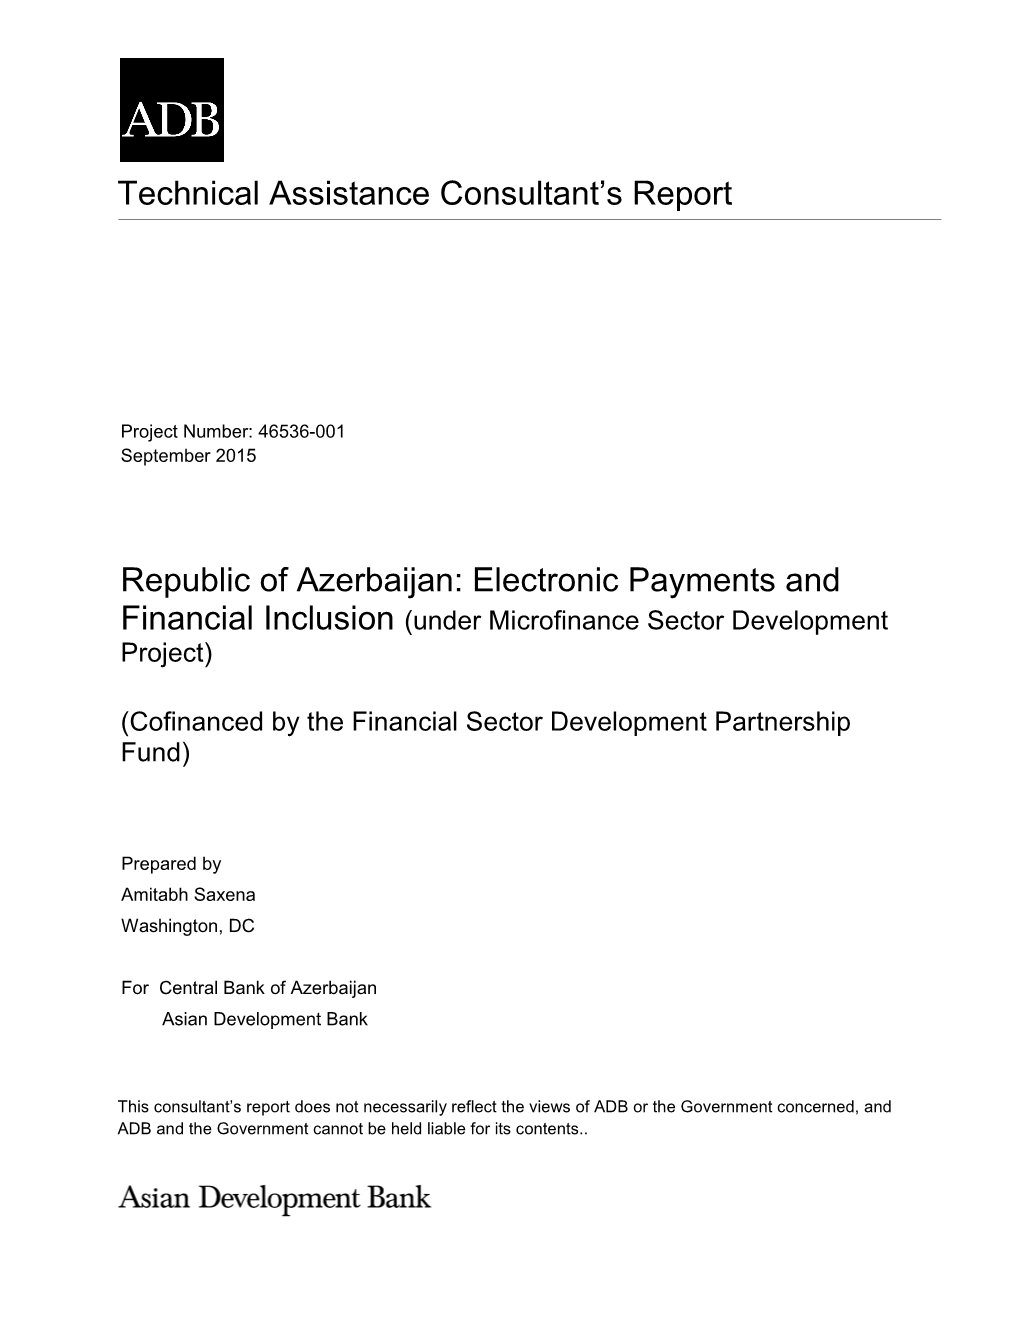 Electronic Payments and Financial Inclusion (Under Microfinance Sector Development Project)